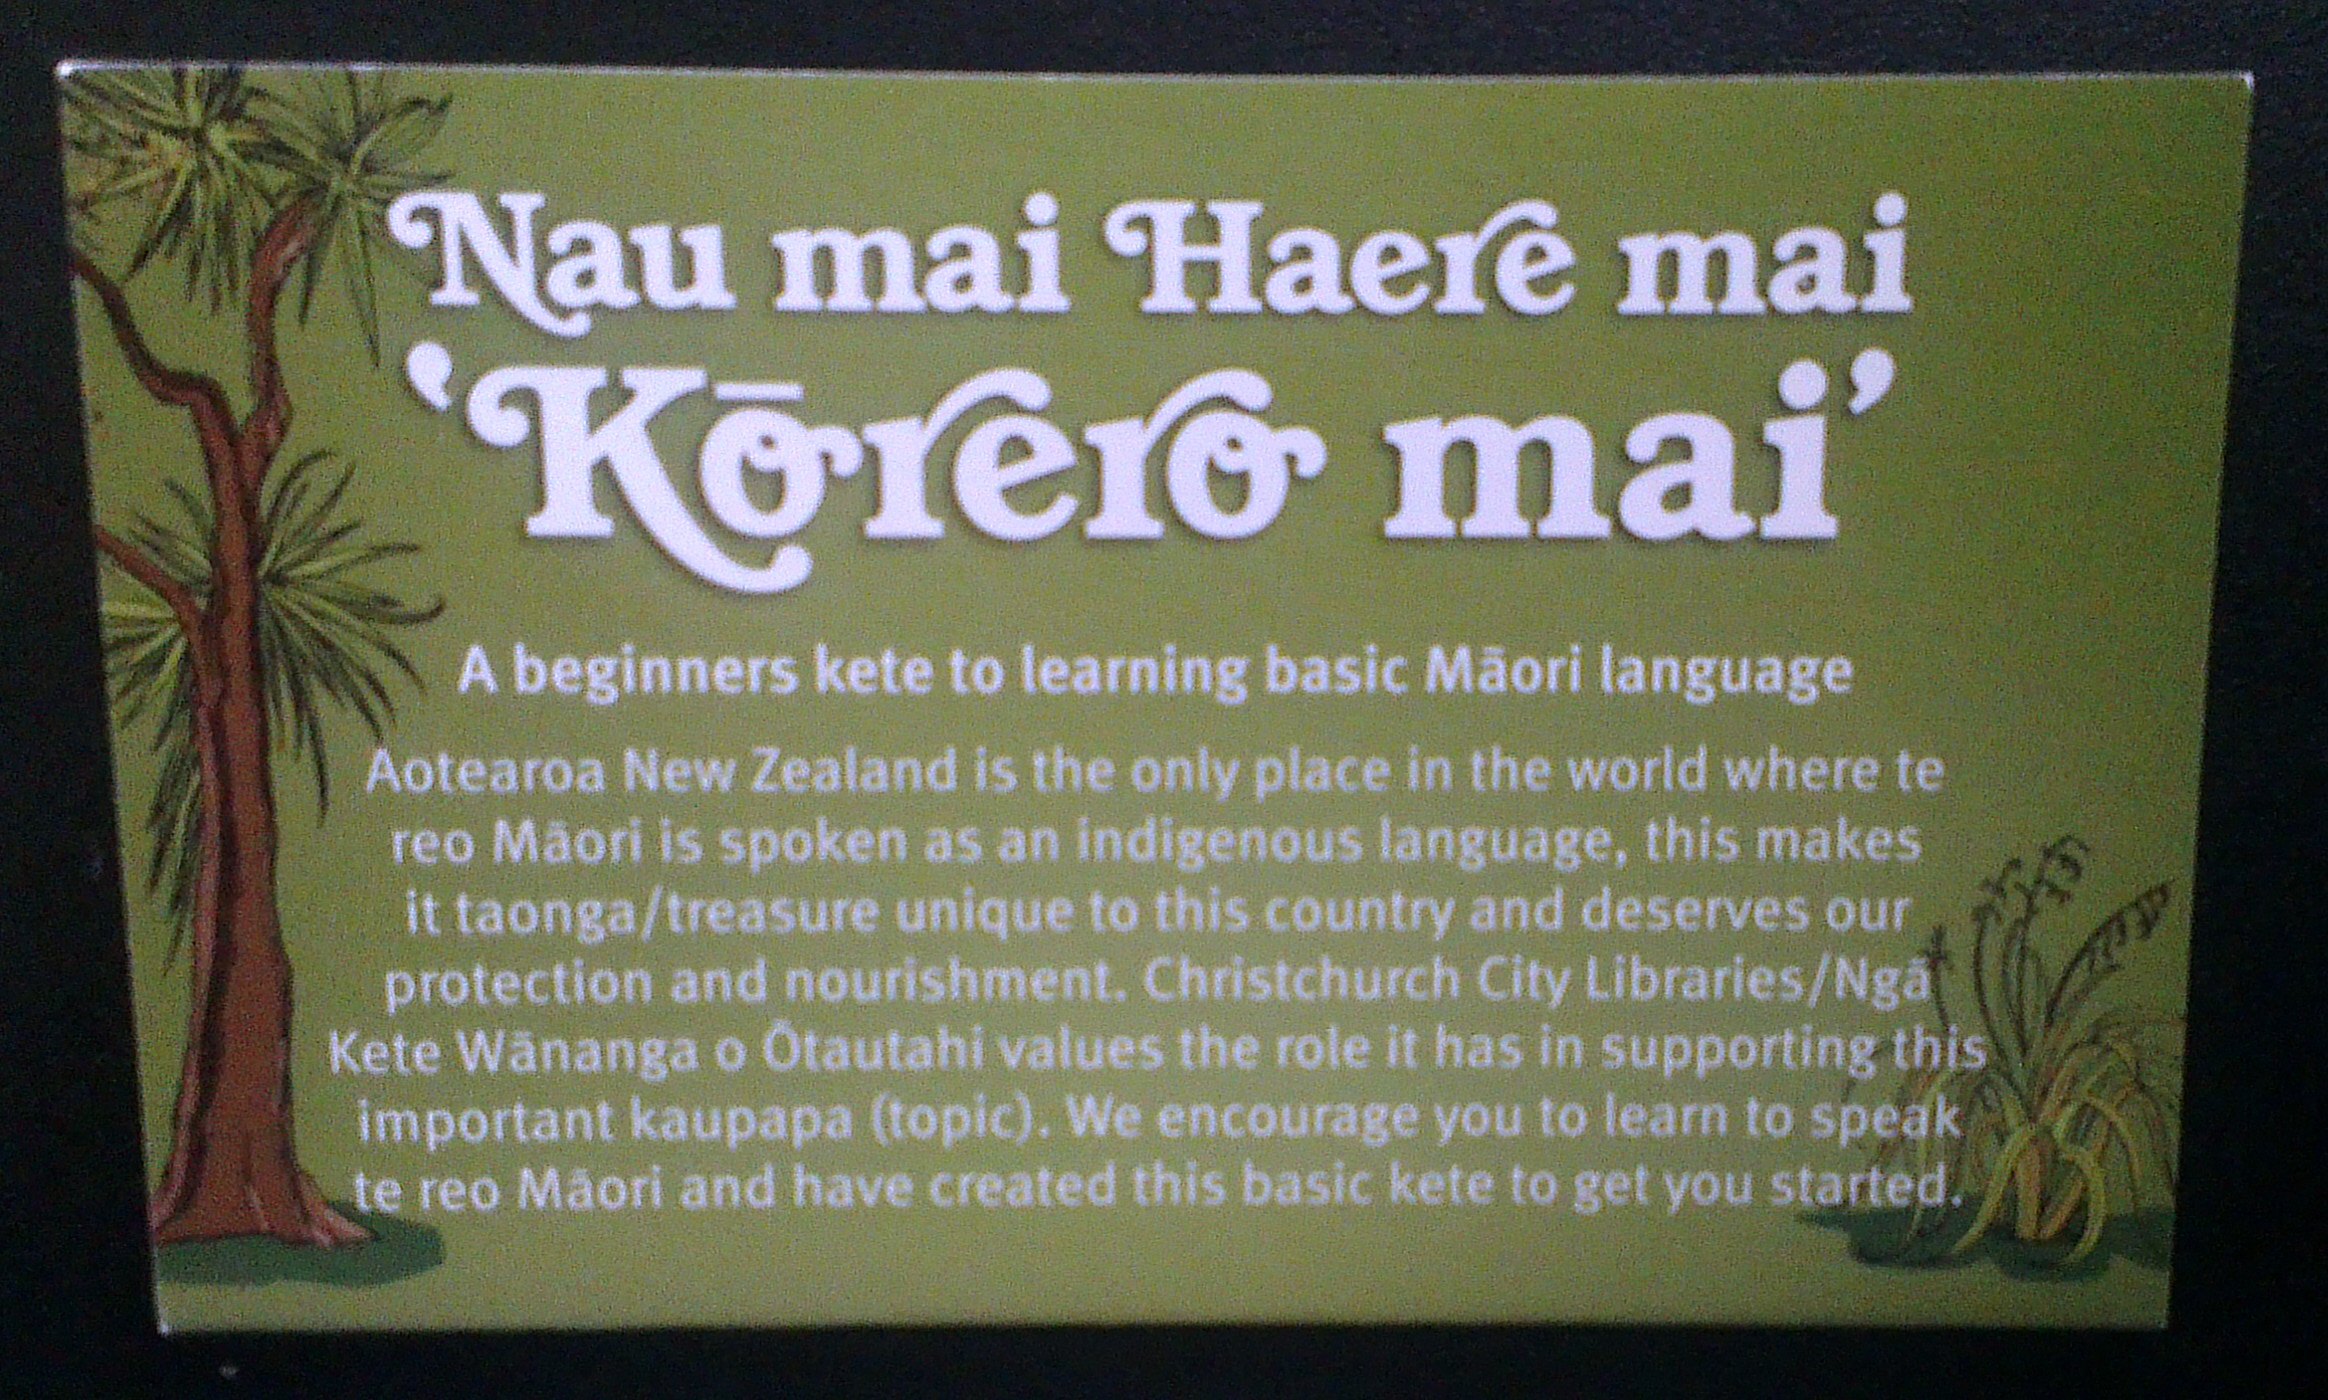   Kete distributed by Christchurch City Libraries during the Maori Language Week  